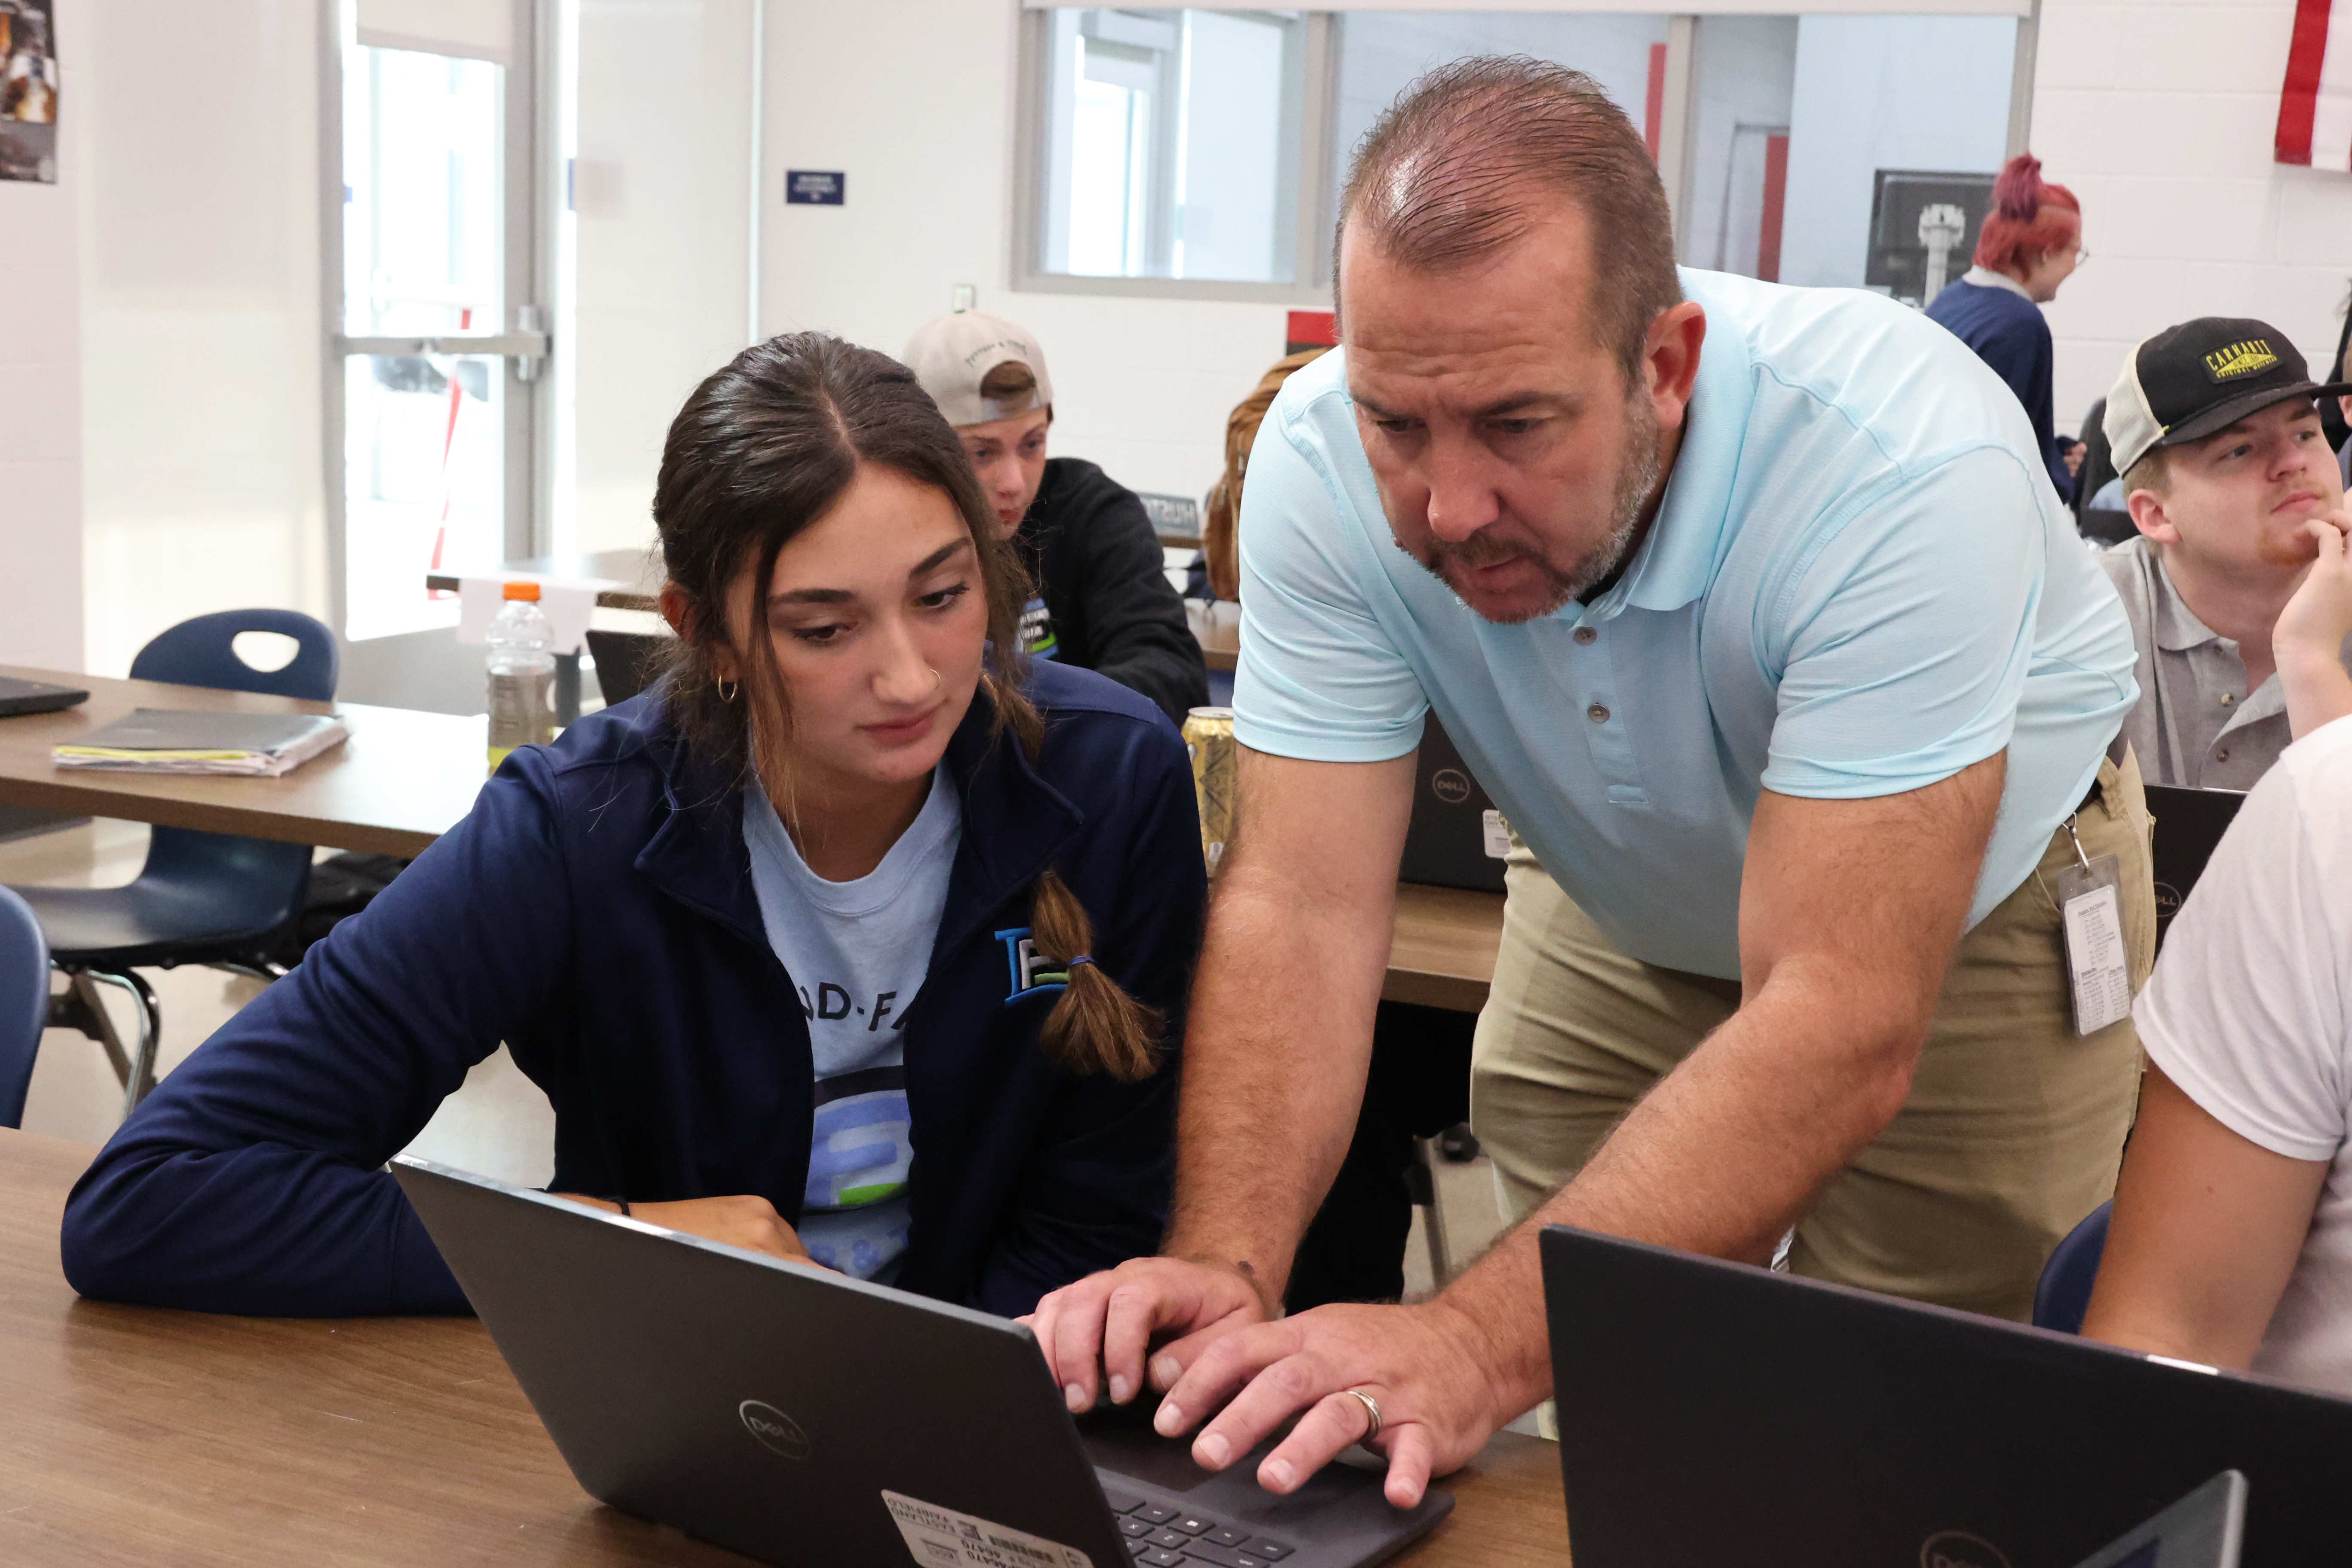 An instructor is at a computer with his student.